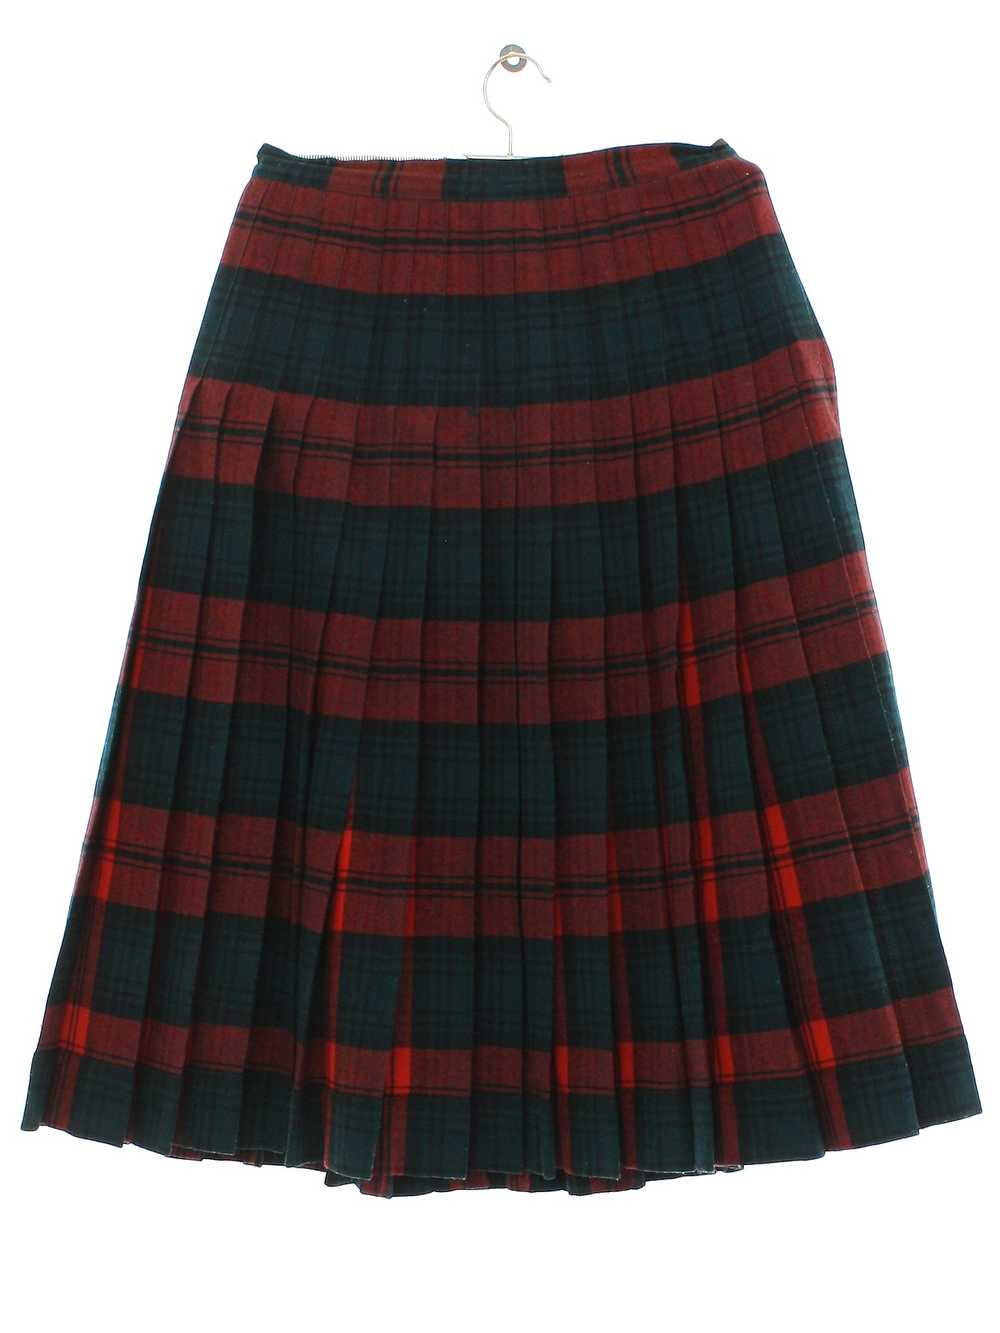 1950's In N Outer Pleated Plaid Wool Skirt - image 3